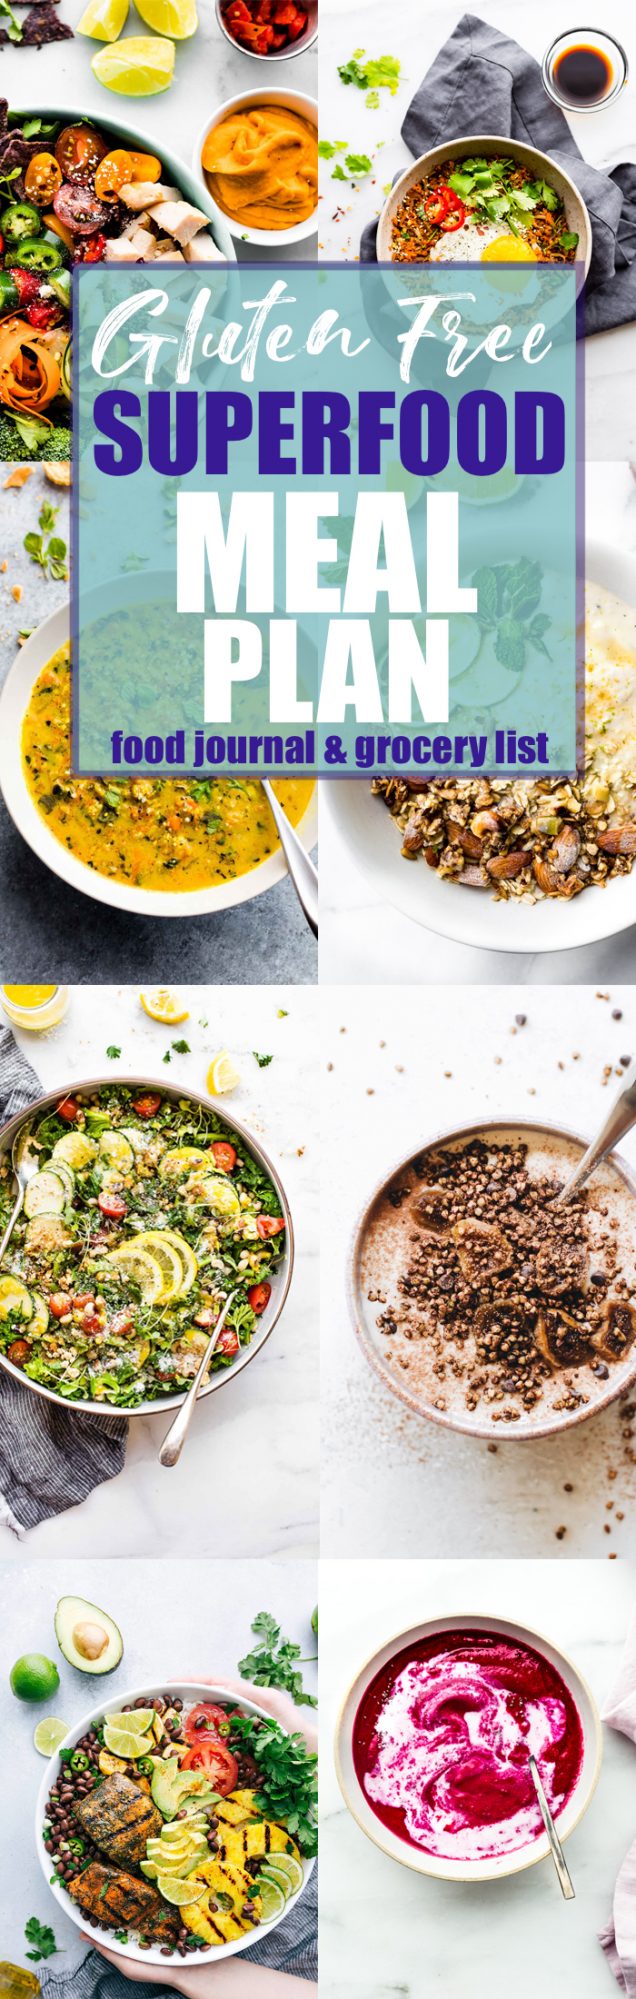 #Superfoods will become your body's best friend when you create and devour the delicious meals in this gluten free superfood meal plan! #mealplan #glutenfree